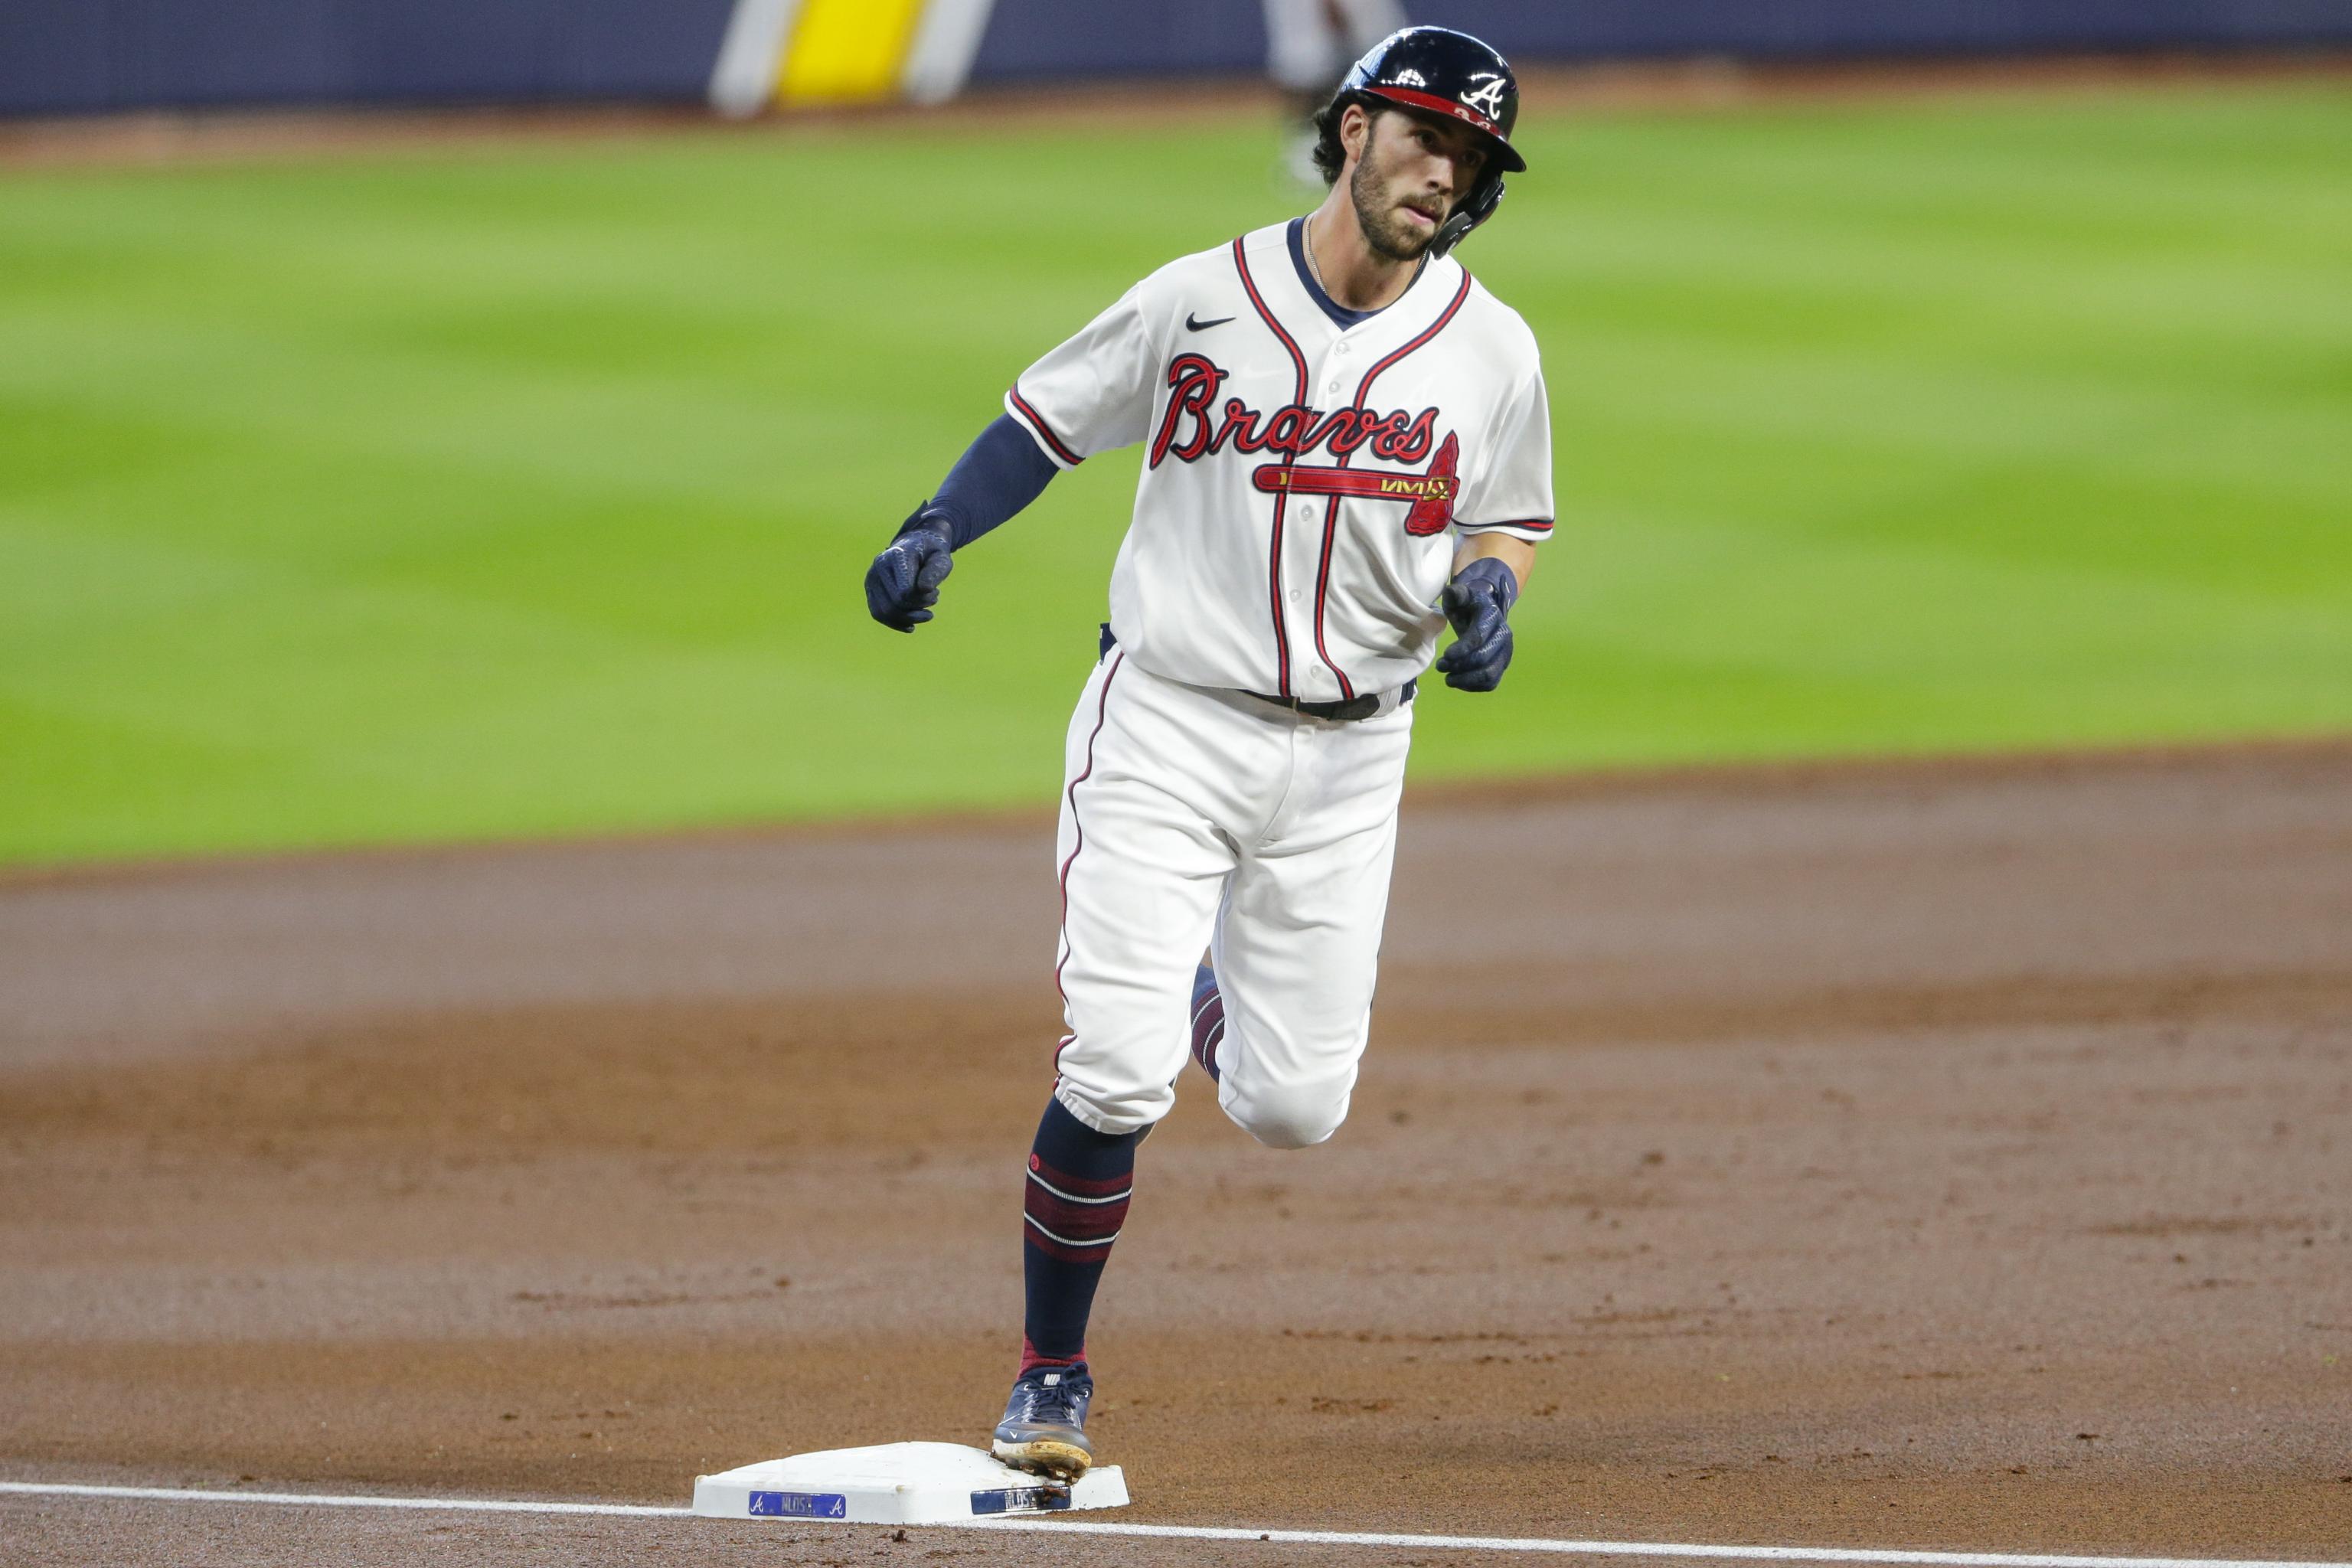 Braves' Dansby Swanson out for remainder of regular season